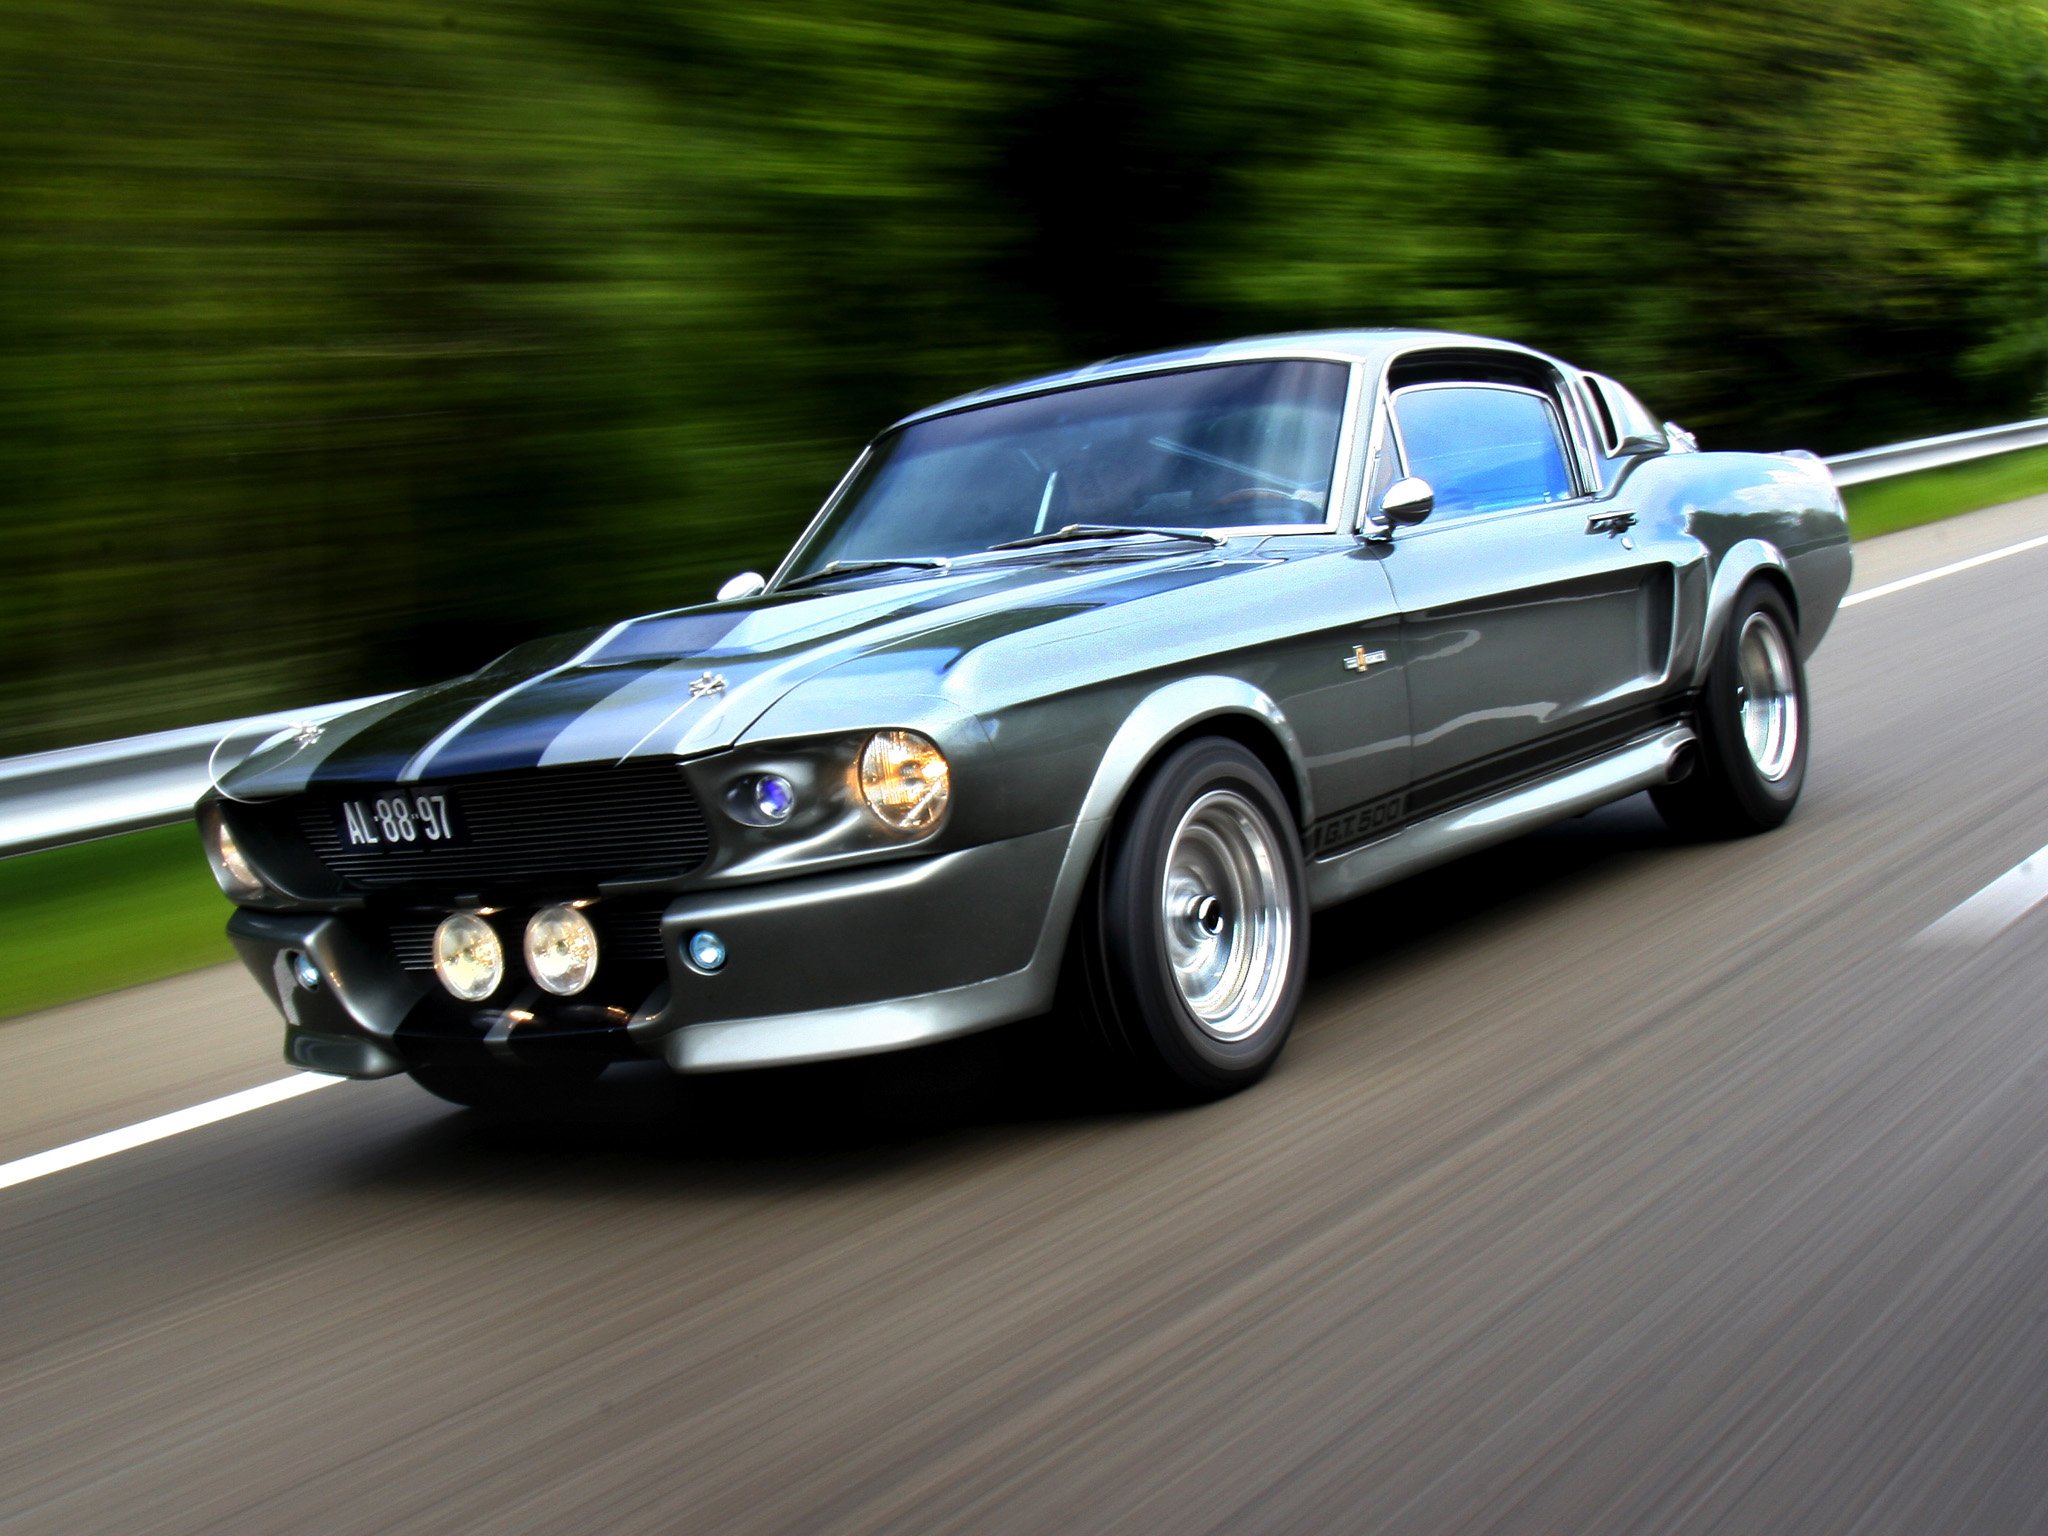 Ford Mustang Shelby Cobra Gt500 Eleanor Hot Rod Rods Muscle